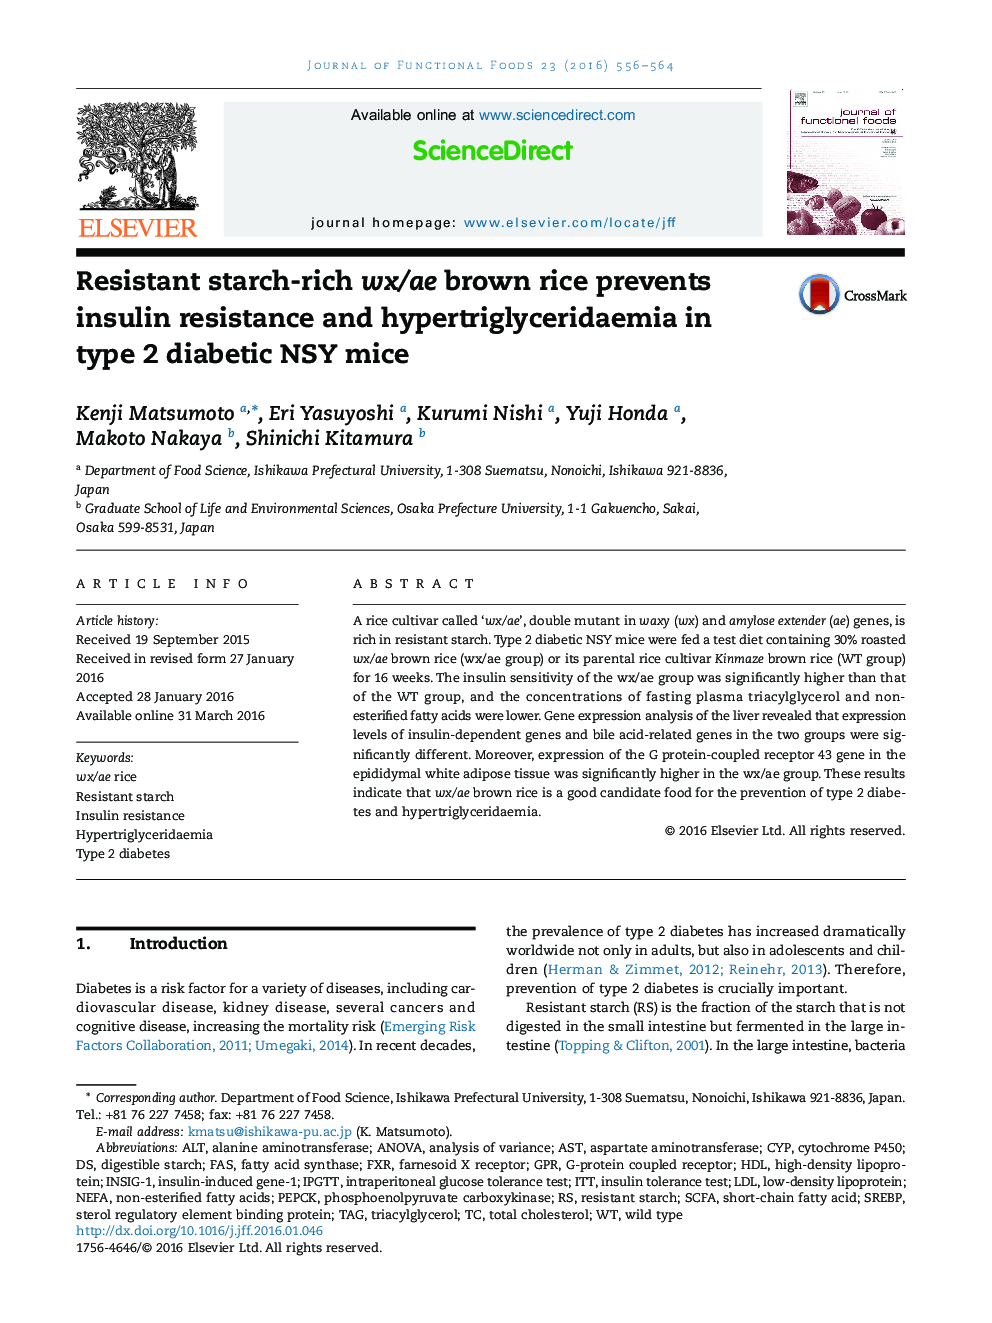 Resistant starch-rich wx/ae brown rice prevents insulin resistance and hypertriglyceridaemia in type 2 diabetic NSY mice